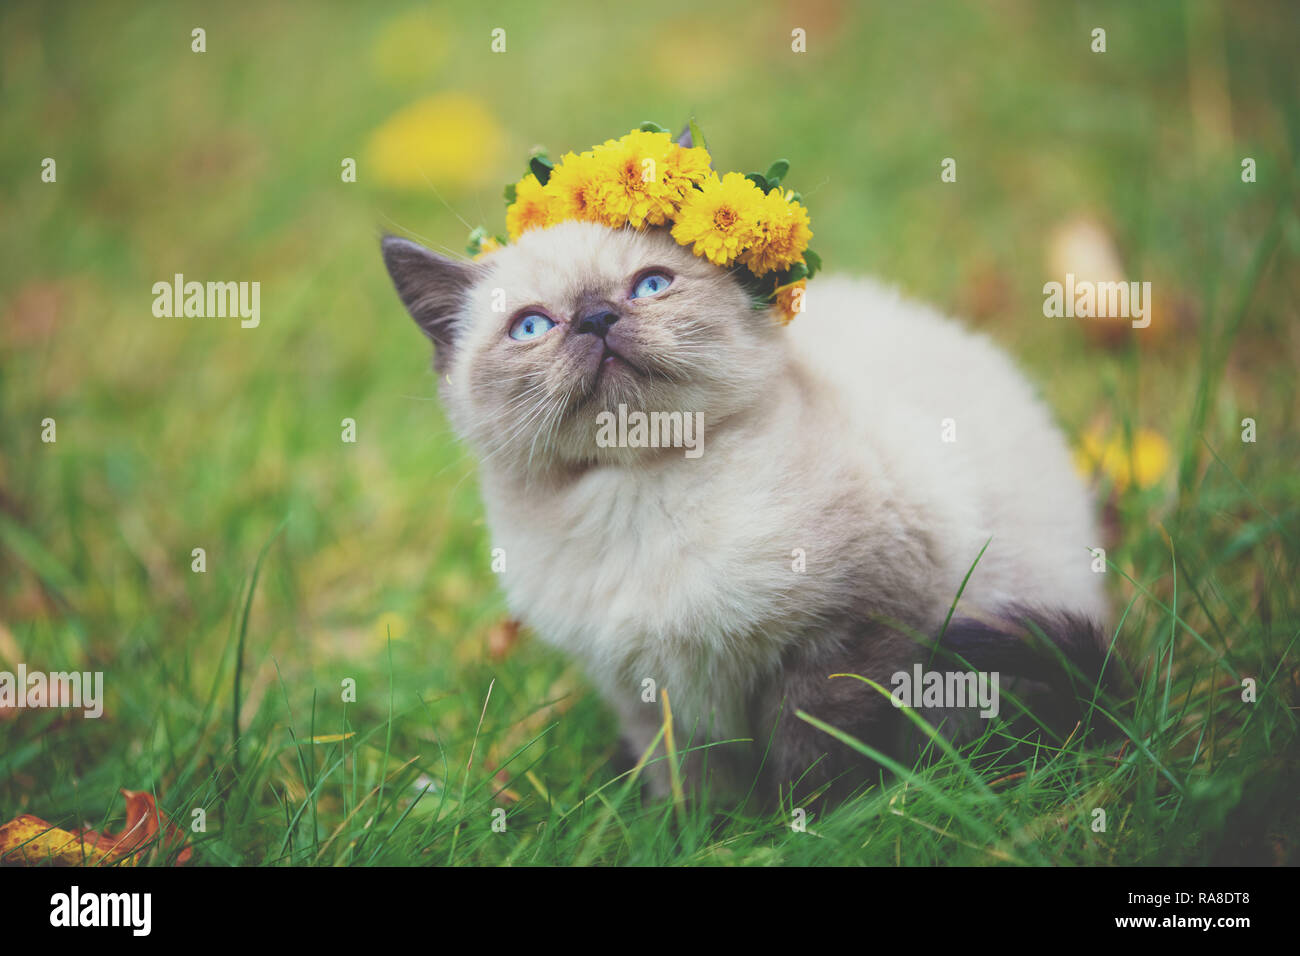 Little seal point kitten sitting on the grass in the autumn garden. Cat crowned with flower chaplet Stock Photo